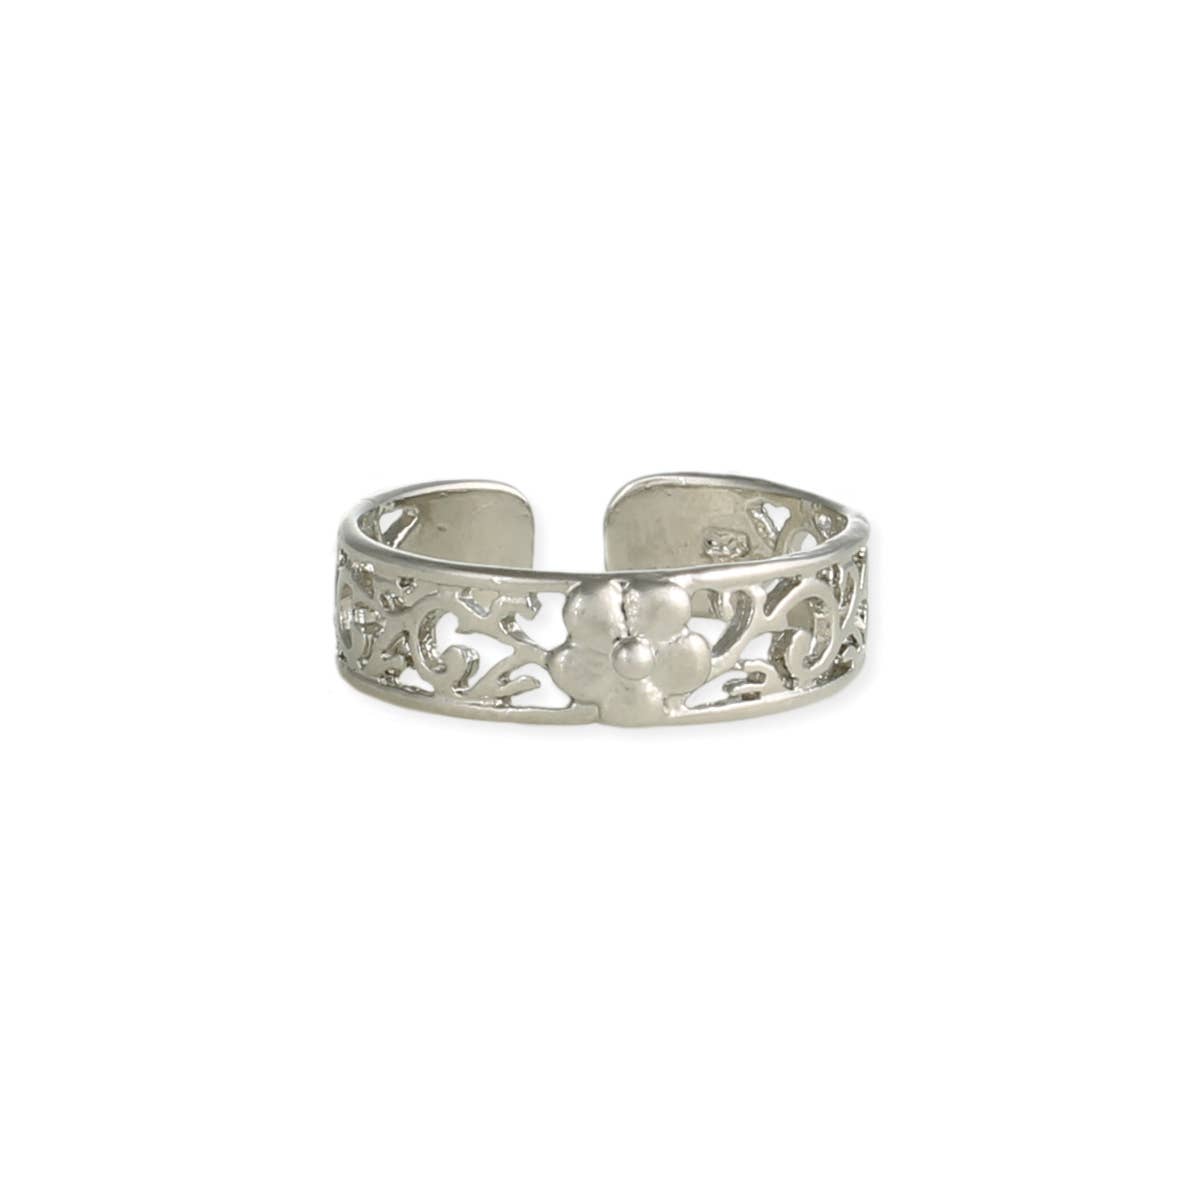 Tri Cut Fitted Toe Ring  Sterling Silver  Shiny Diamond Cut  Wear as Toe or Midi Ring  Small Sizes for Sized Pinky or Toe